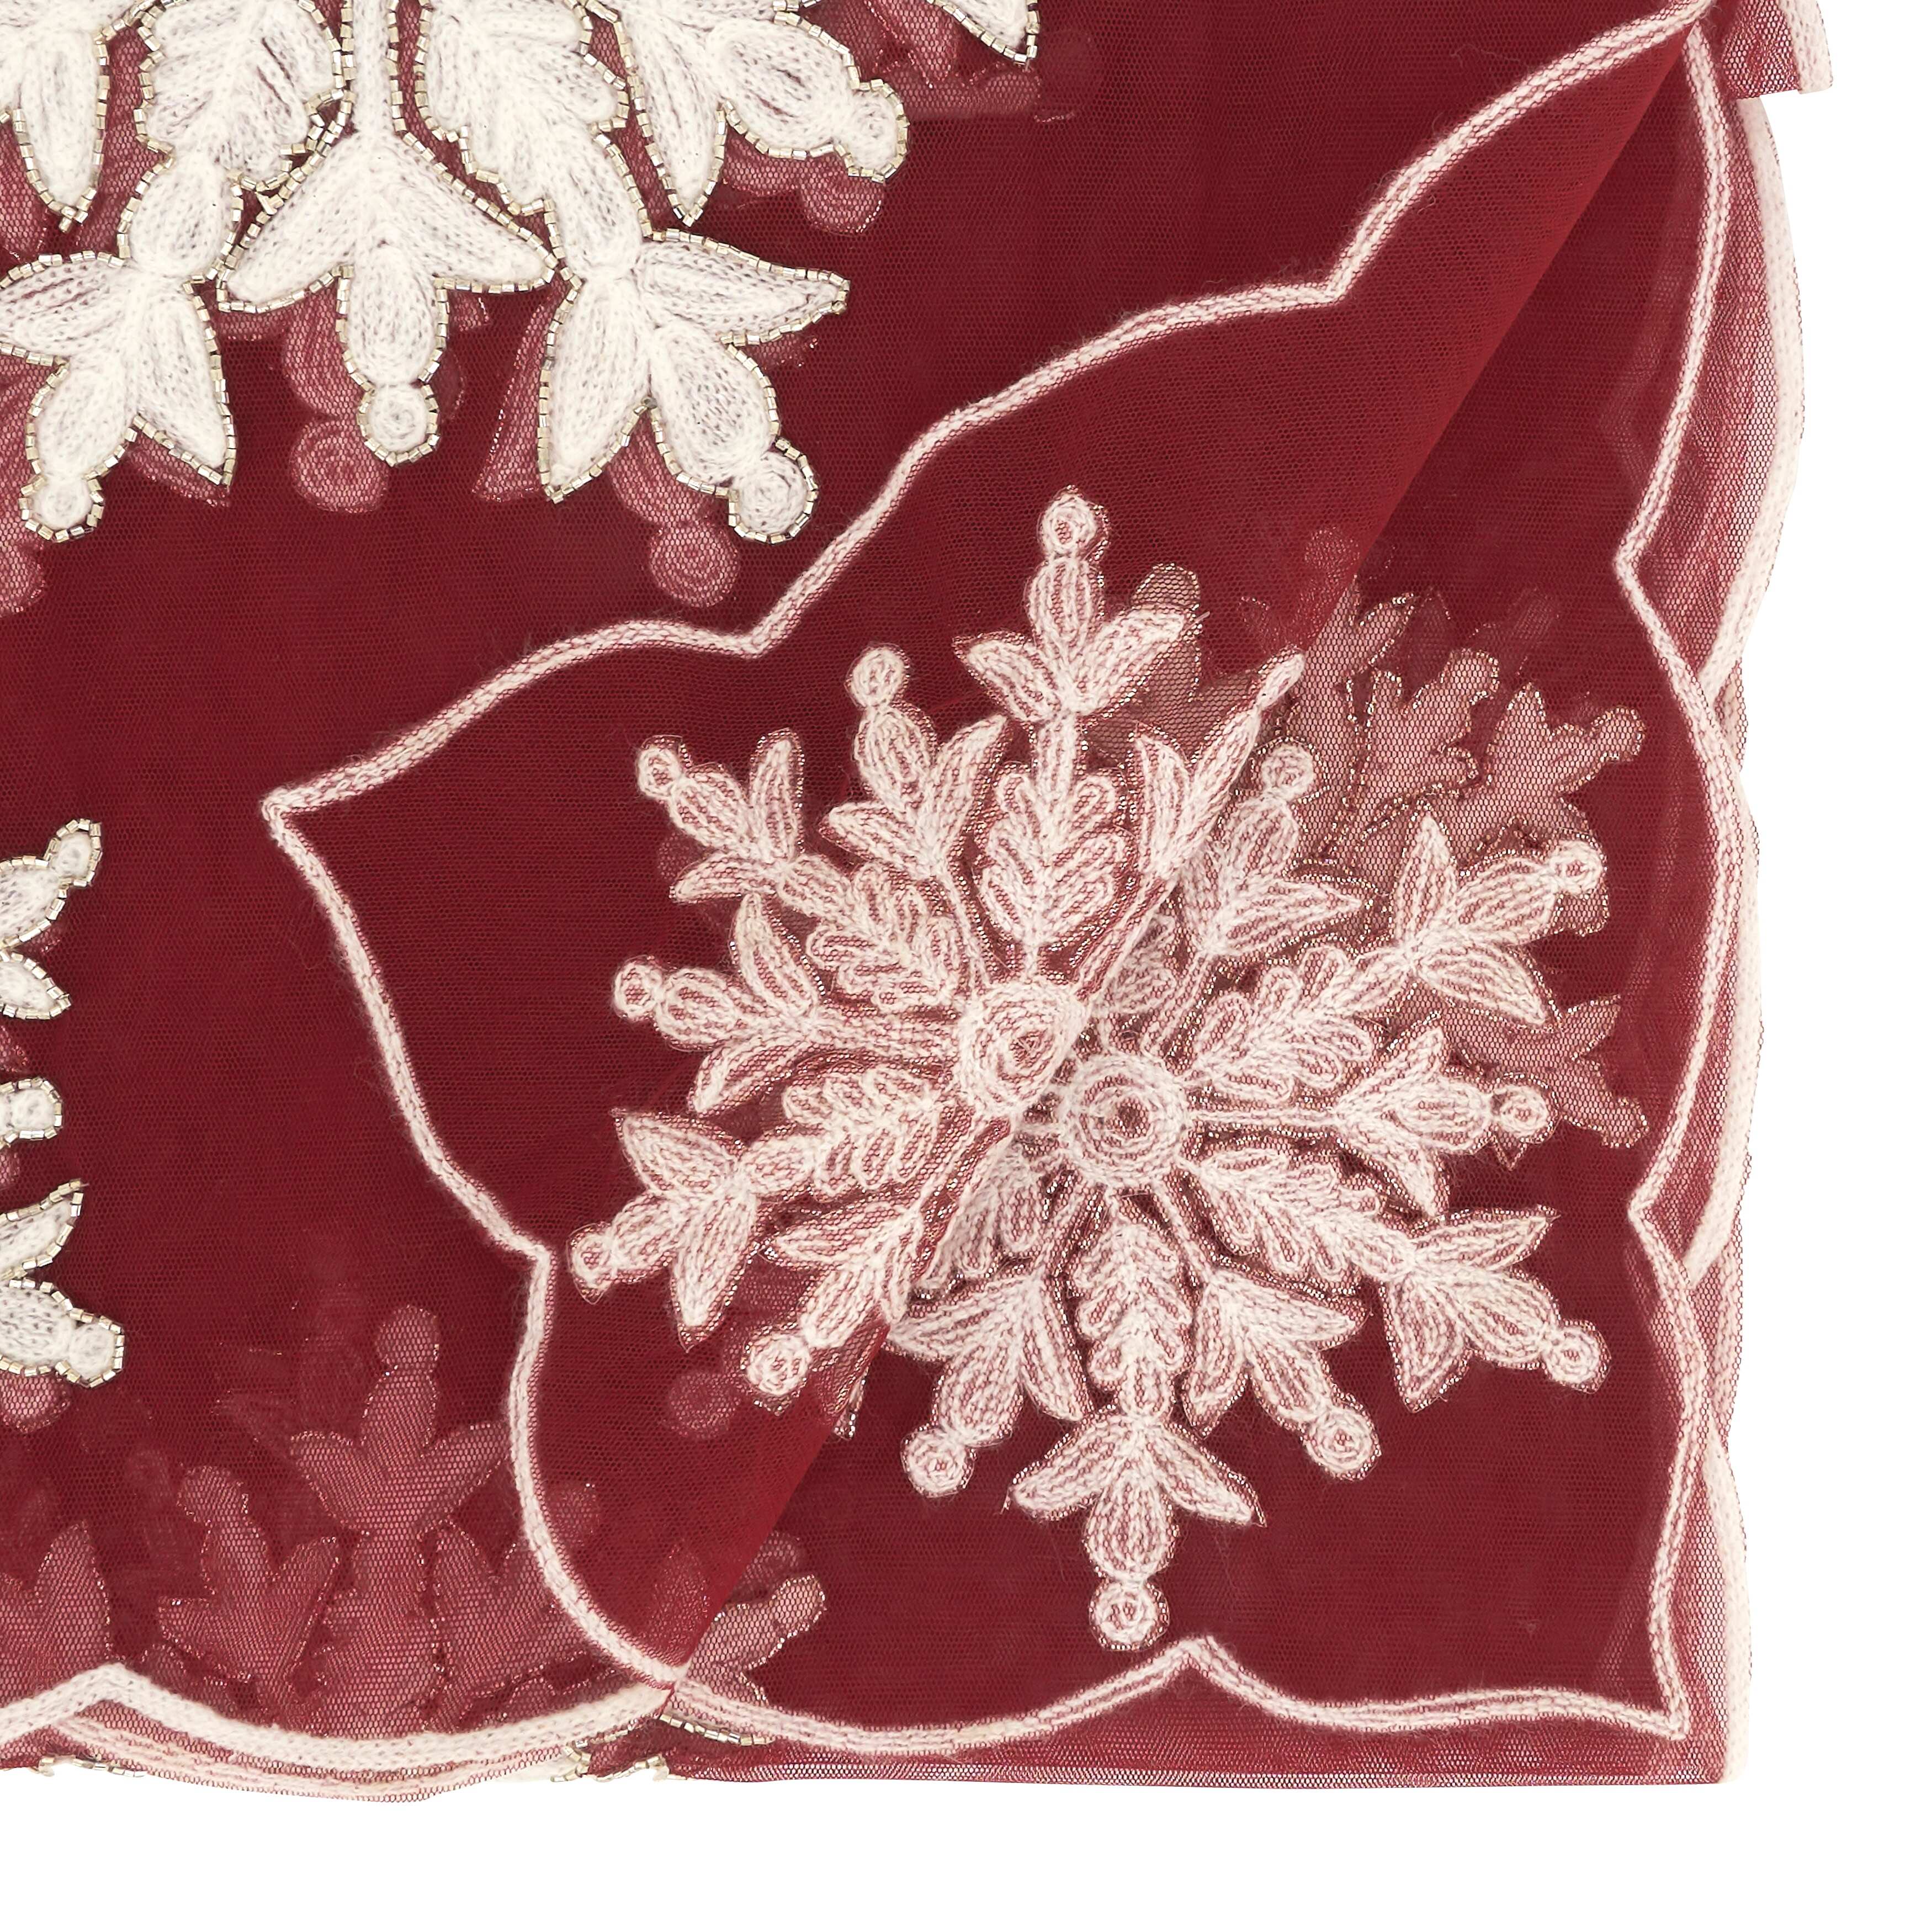 Beaded and Embroidered Winter Snowflake Tablecloth